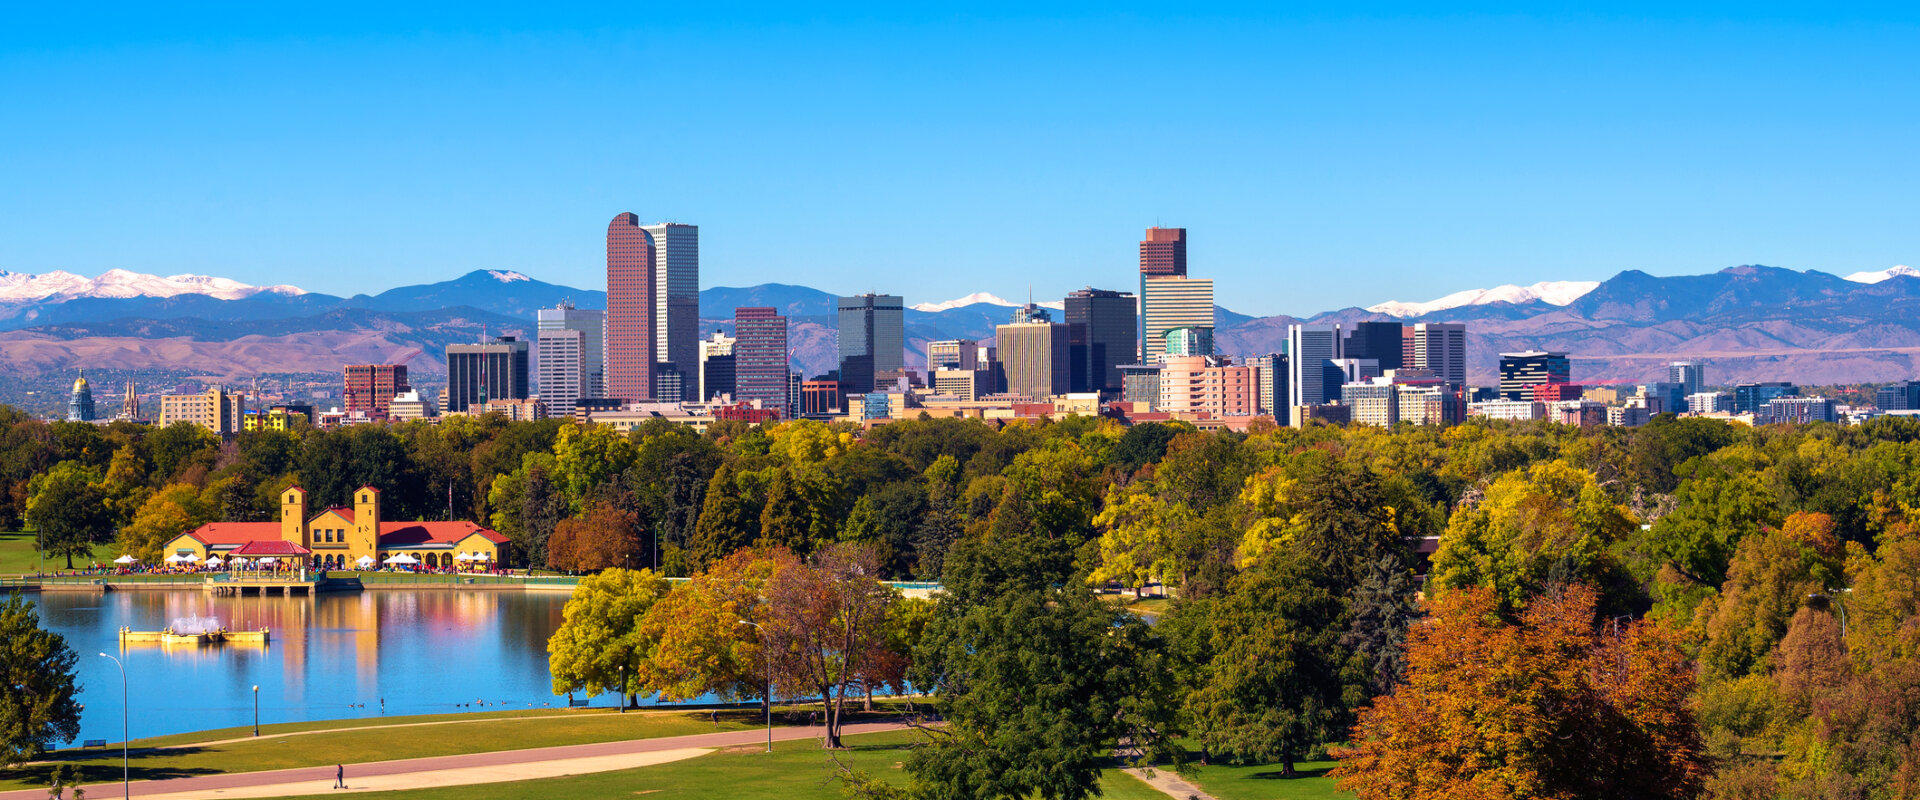 City skyline of Denver Colorado downtown with snowy Rocky Mountains and the City Park Lake.